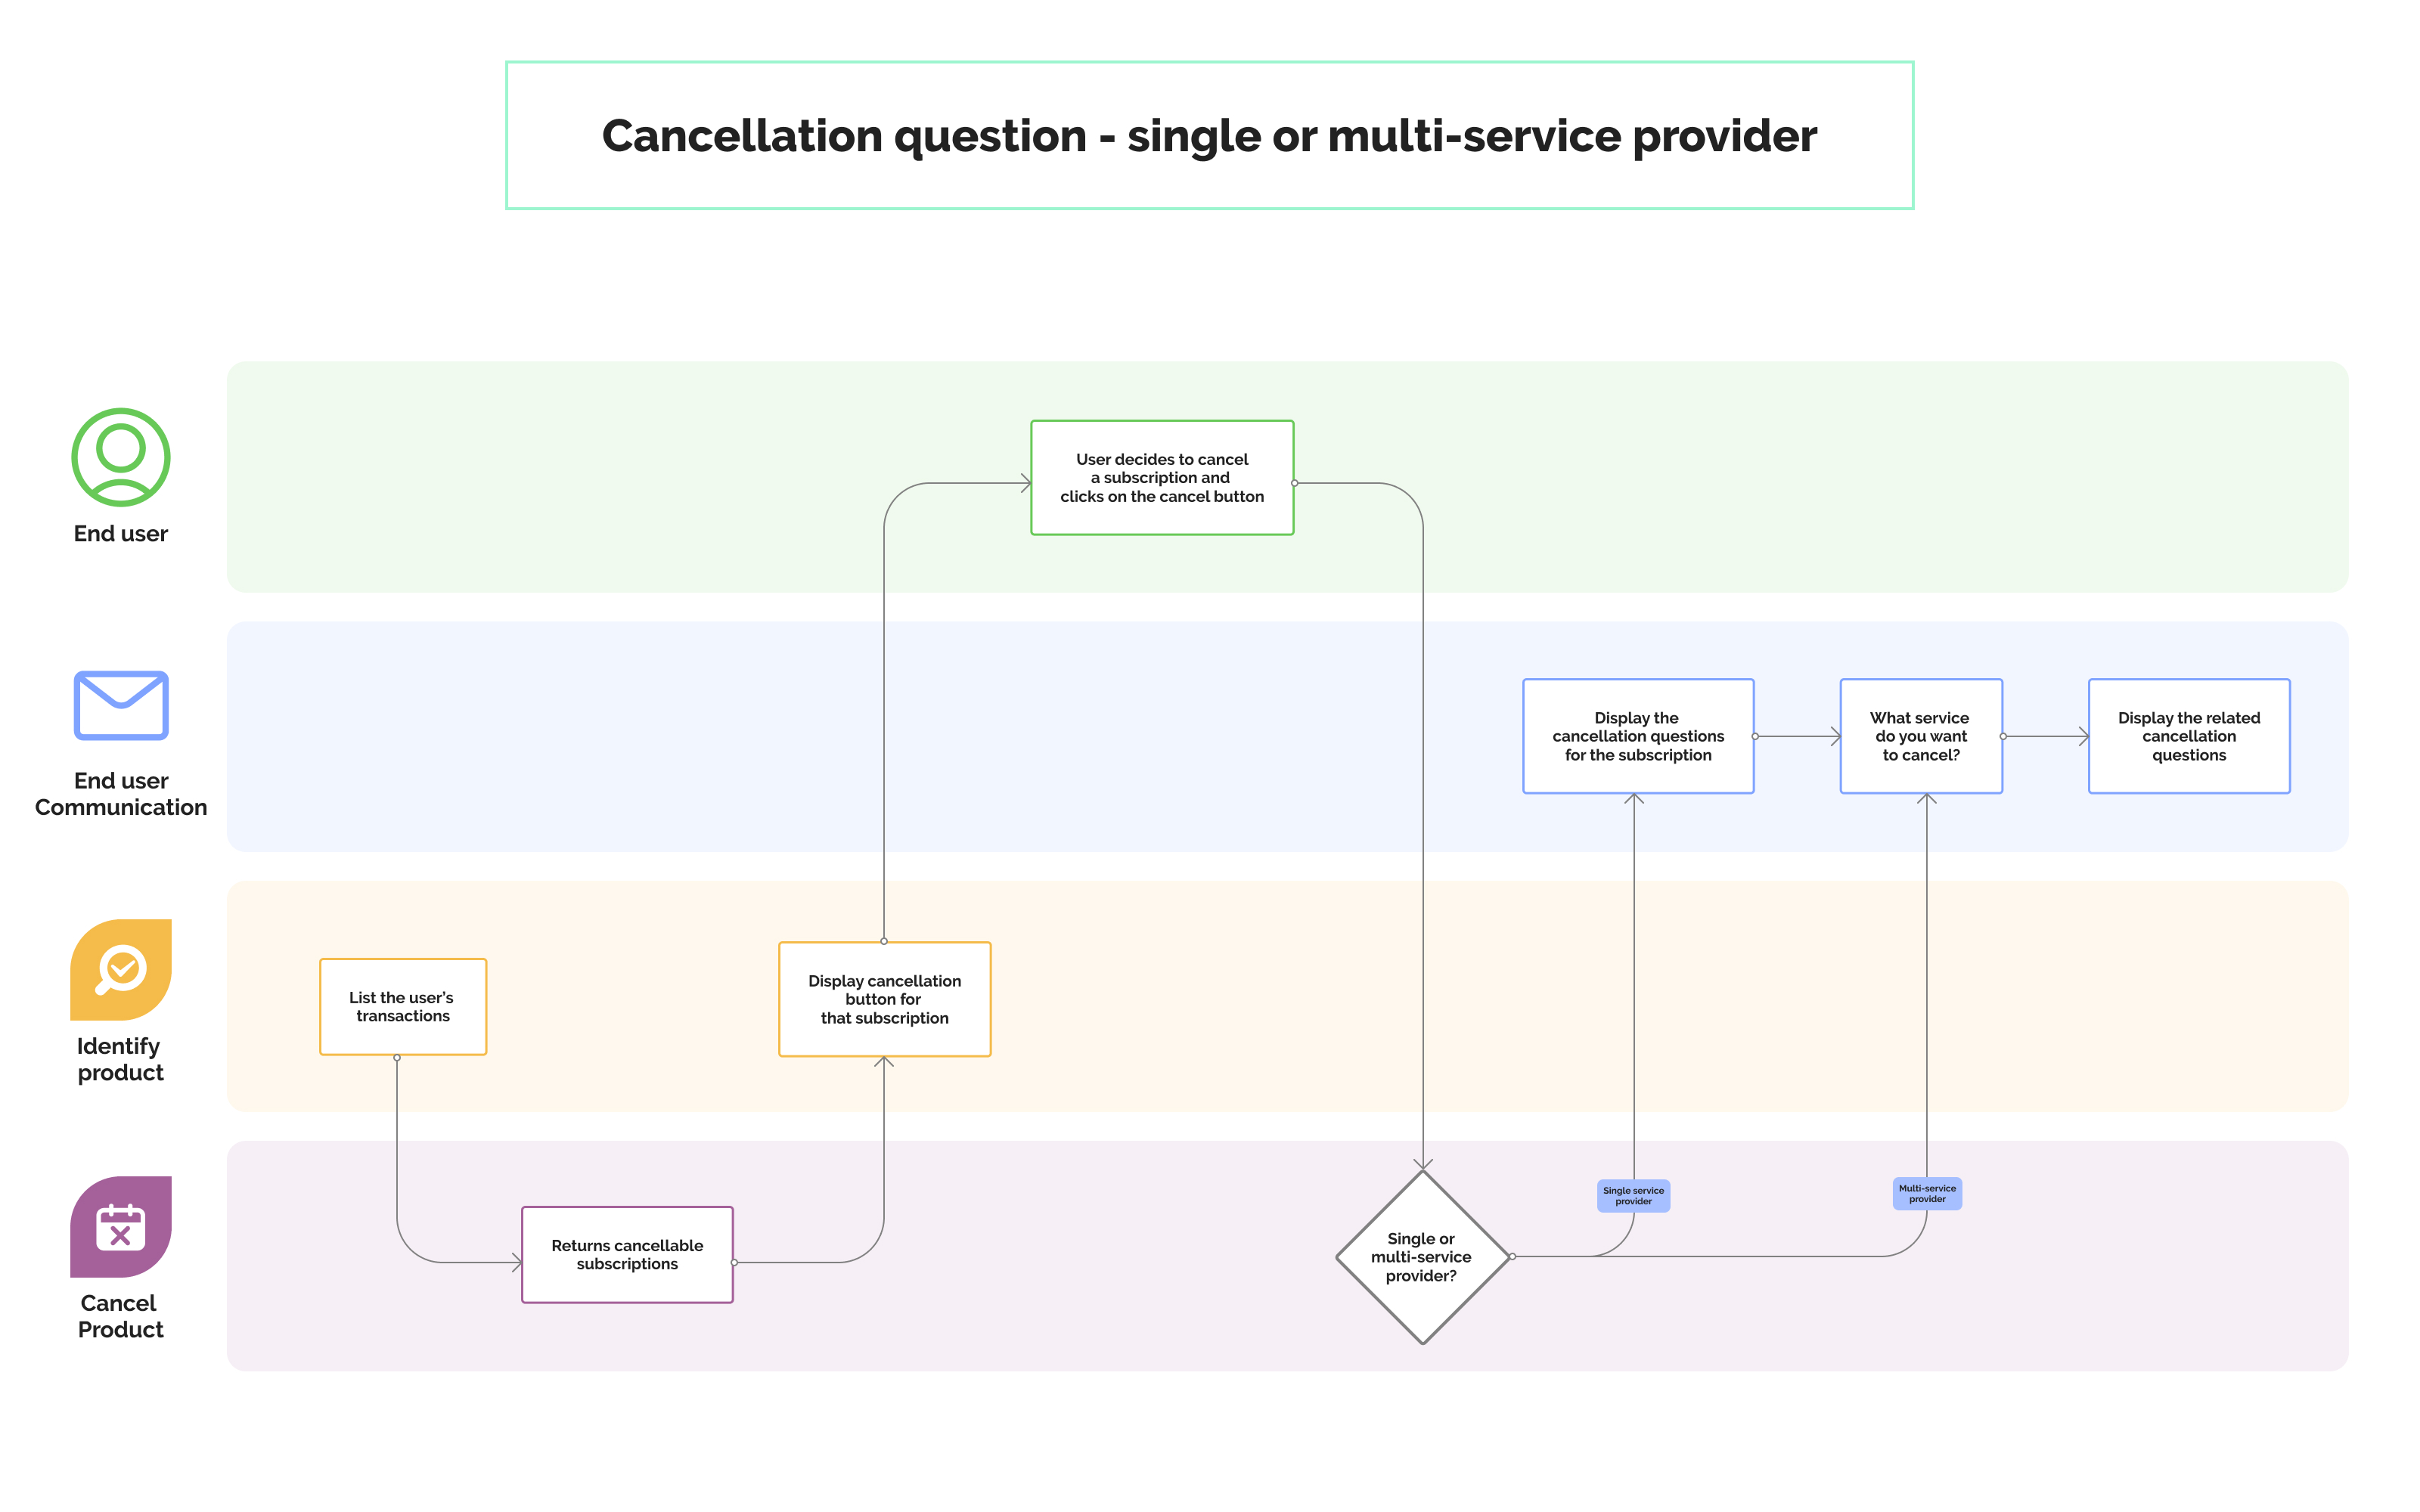 The Cancellation questions displayed to the user is dependent on if the subscription is associated with a single or multi service provider